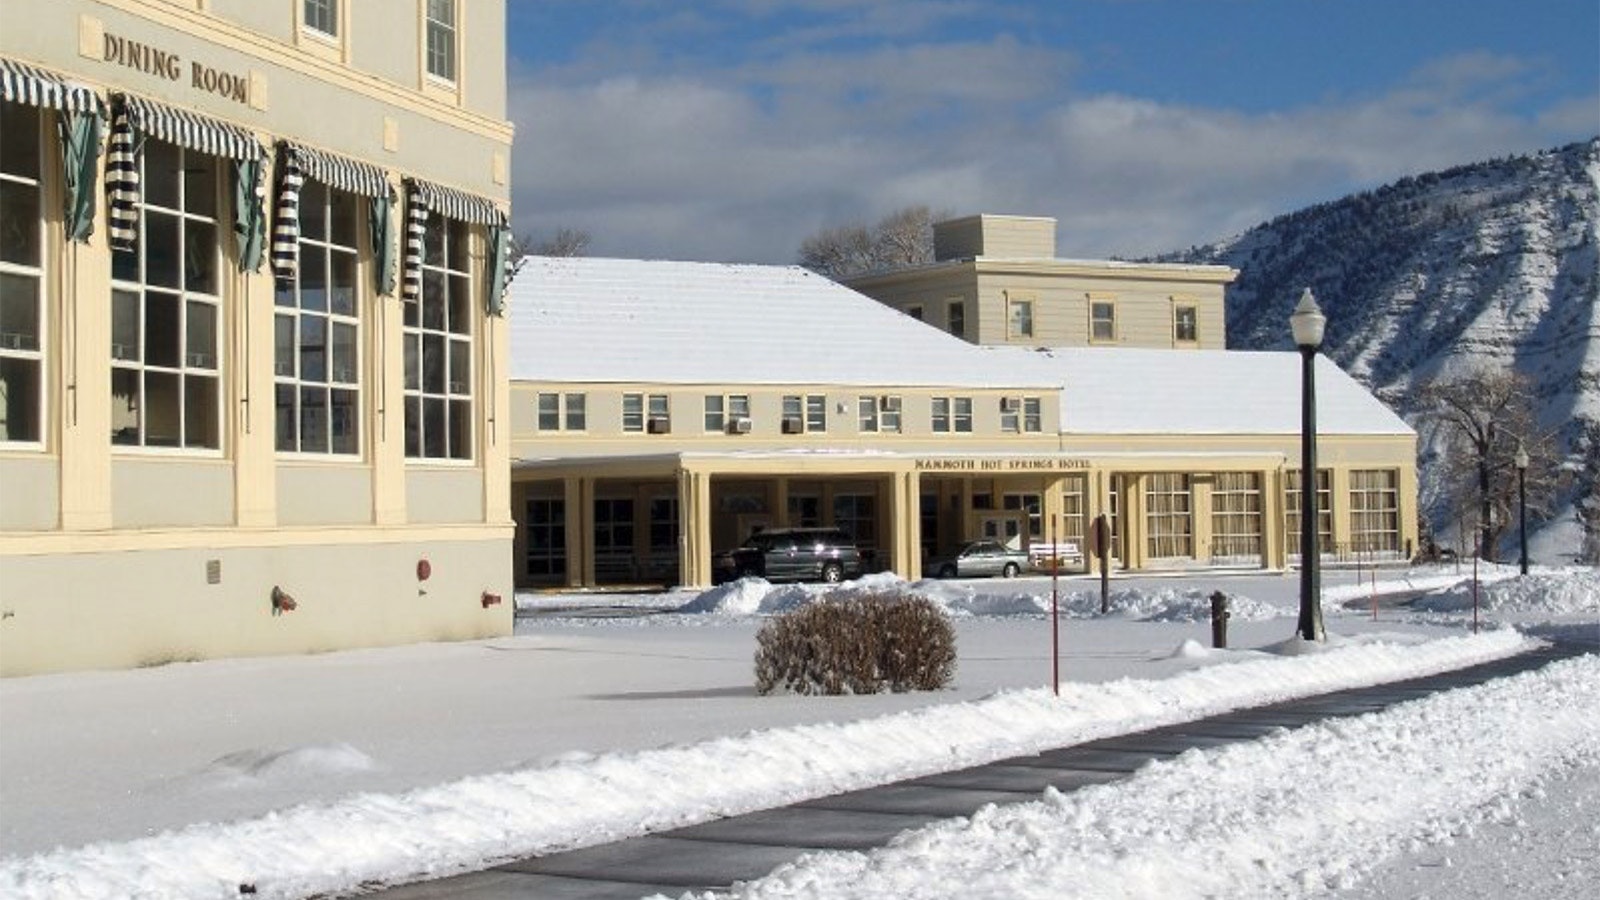 Colder temperatures and above-average snowfall have slowed progress on a new wastewater treatment system for the Mammoth Hot Springs Hotel, prompting the hotel to cancel its planned April 28 opening.